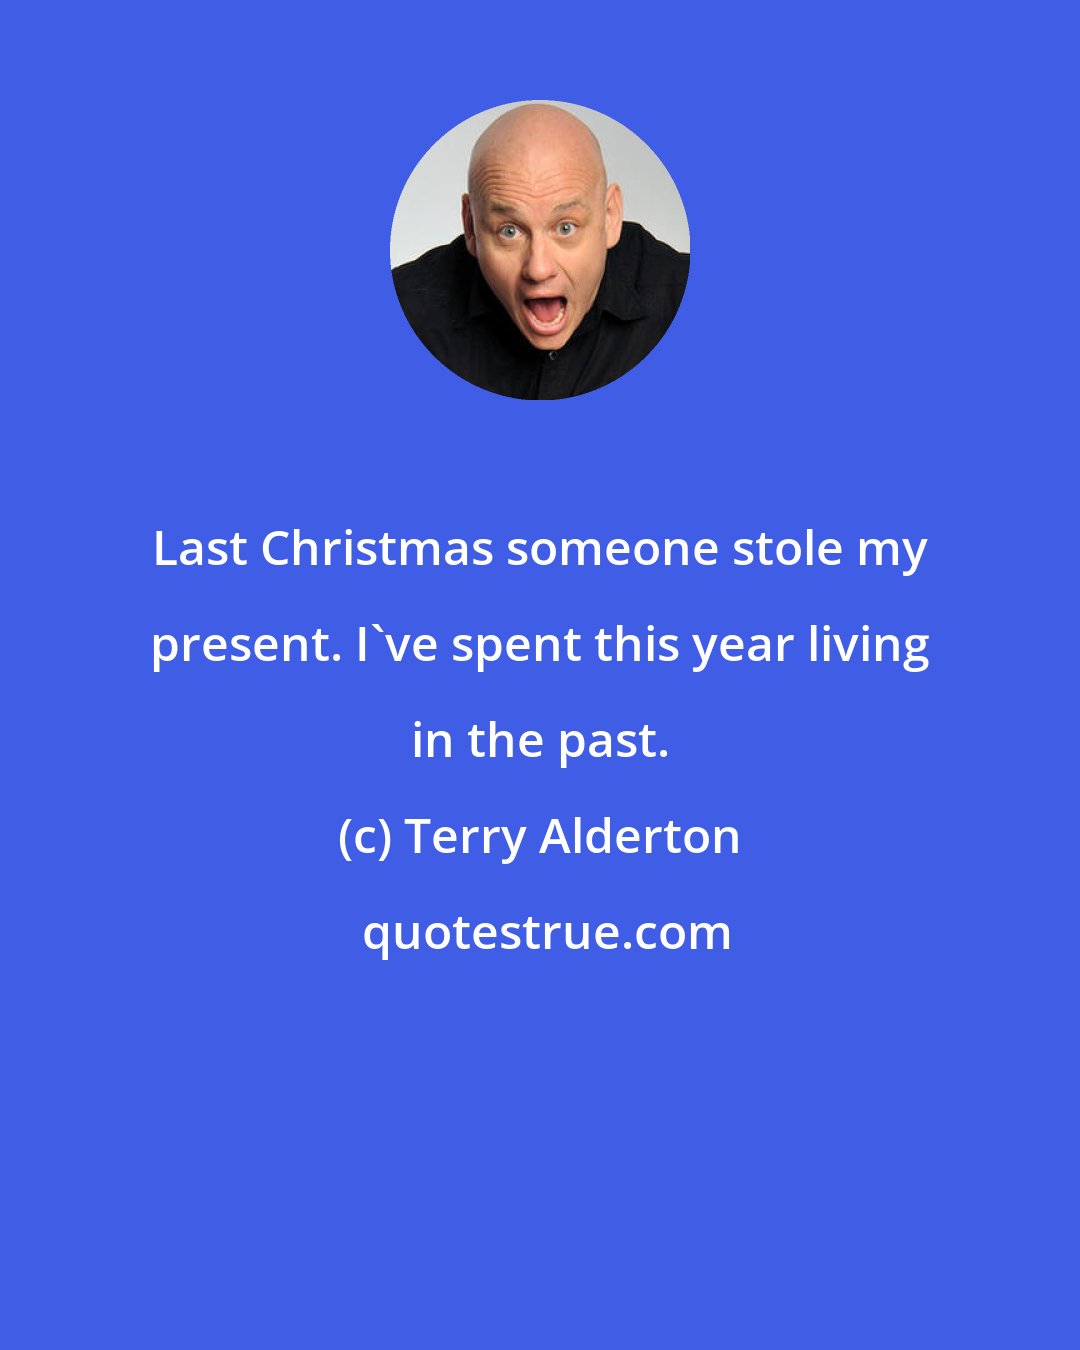 Terry Alderton: Last Christmas someone stole my present. I've spent this year living in the past.